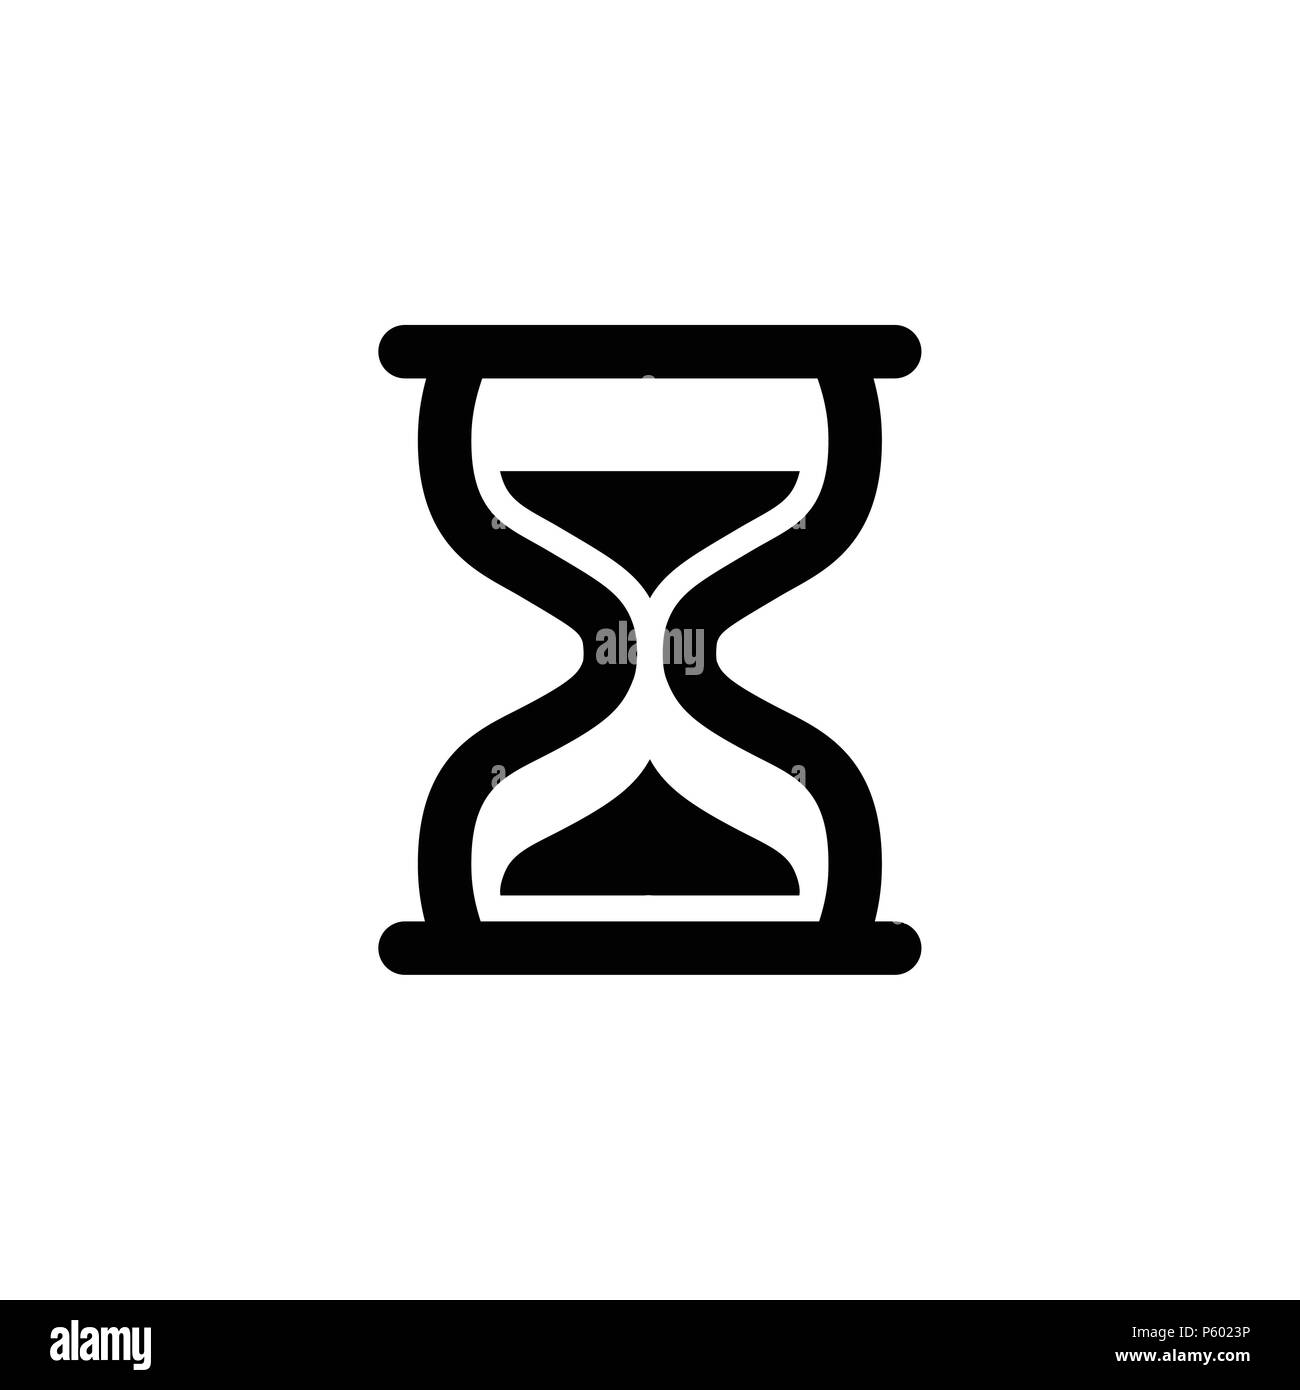 Hour glass vector icon on separated background. Variant No. 2 Stock Vector